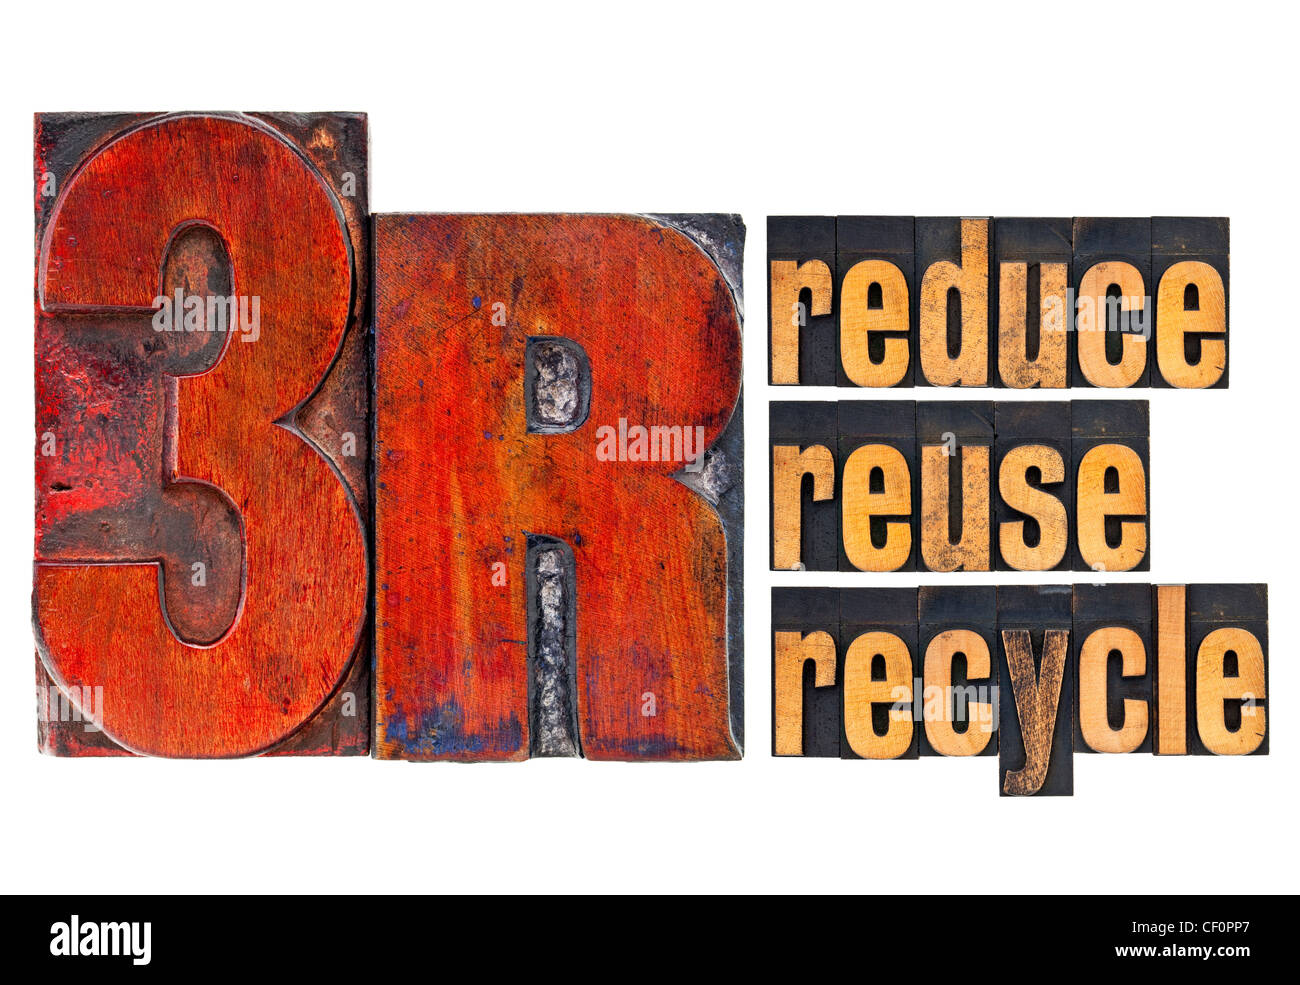 reduce, reuse, recycle - 3R concept - a collage of isolated words in vintage letterpress wood type Stock Photo